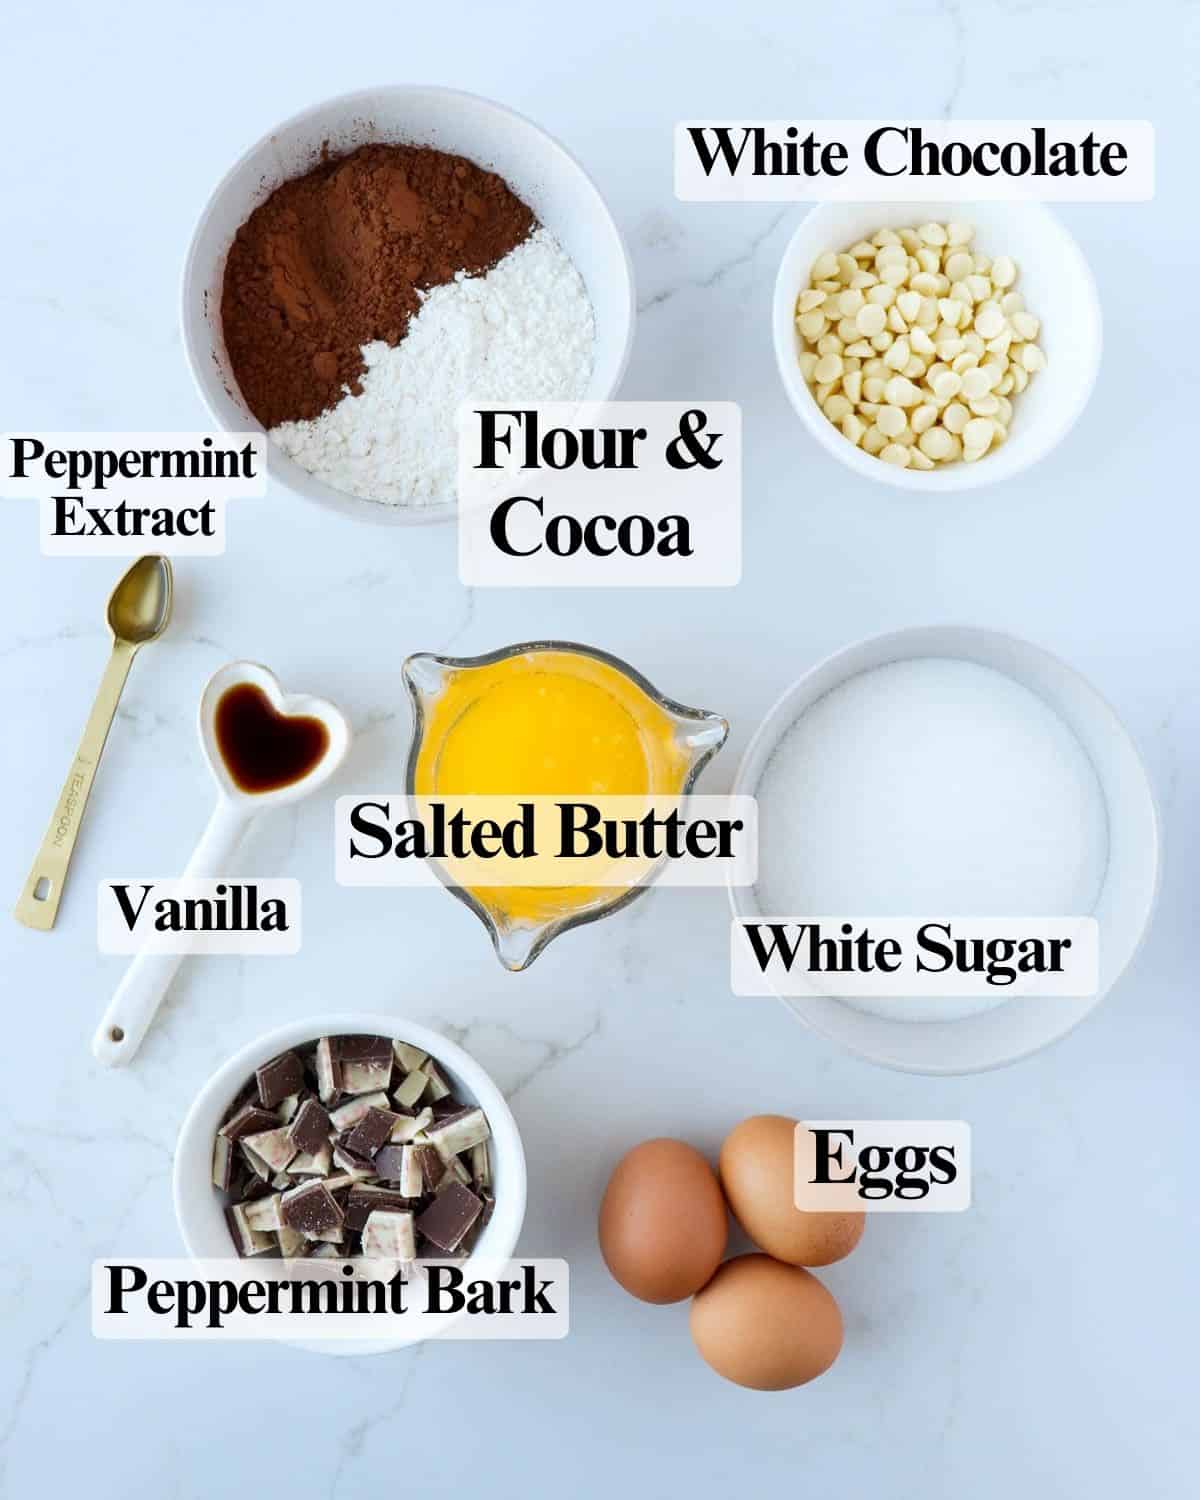 Ingredients for peppermint brownies: melted butter, white sugar, eggs, vanilla, peppermint extract, flour, cocoa, white chocolate chips, and chopped peppermint bark.